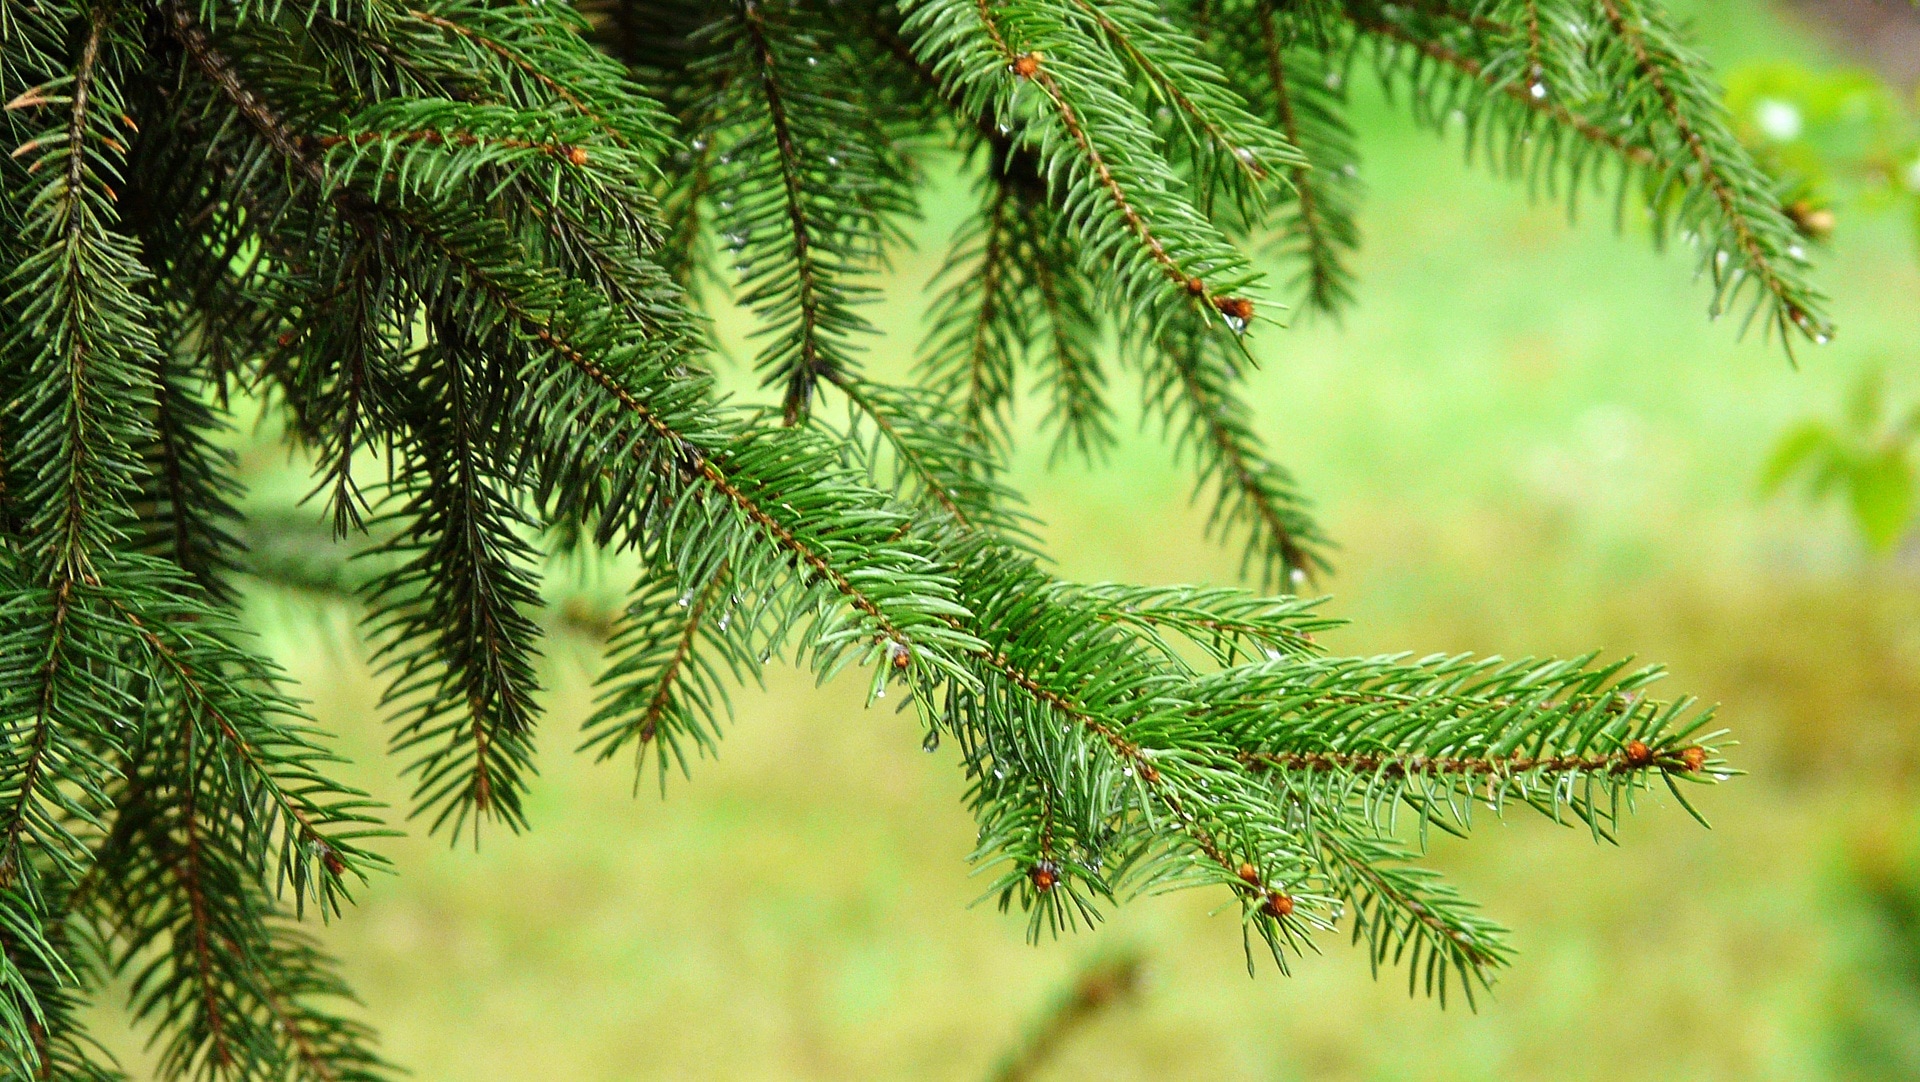 Spruce, Needle, Needles, Tree, Green, green color, no people